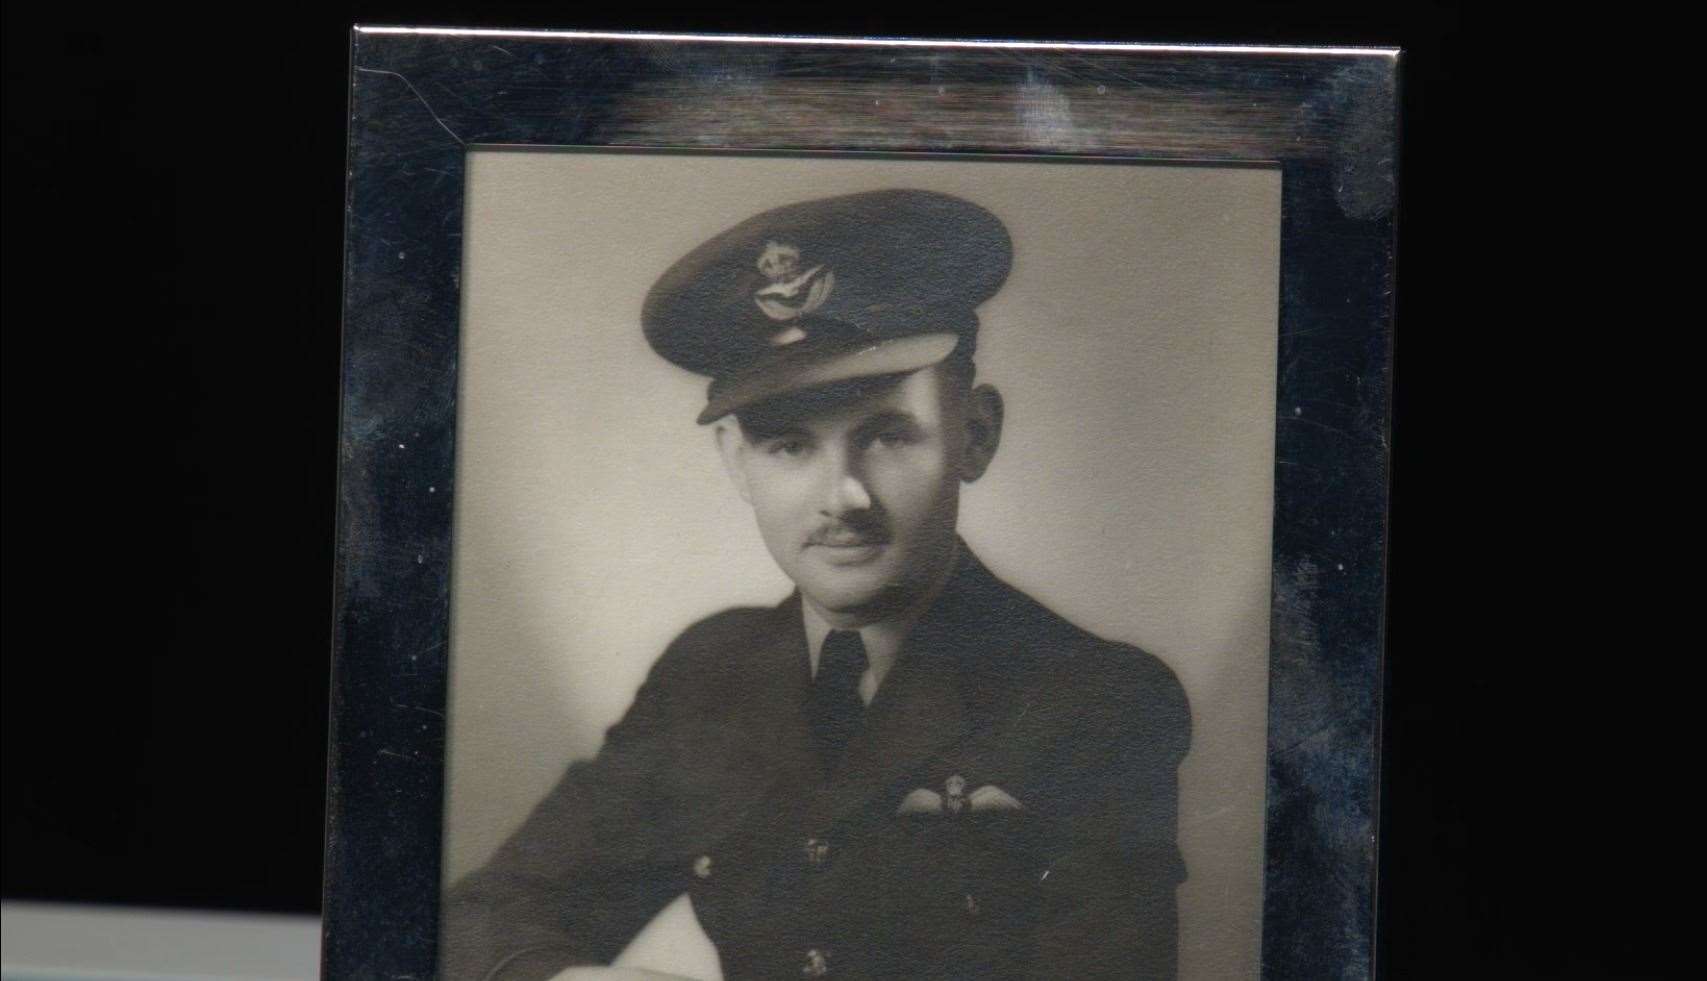 A younger Colin Betts in his formal military uniform